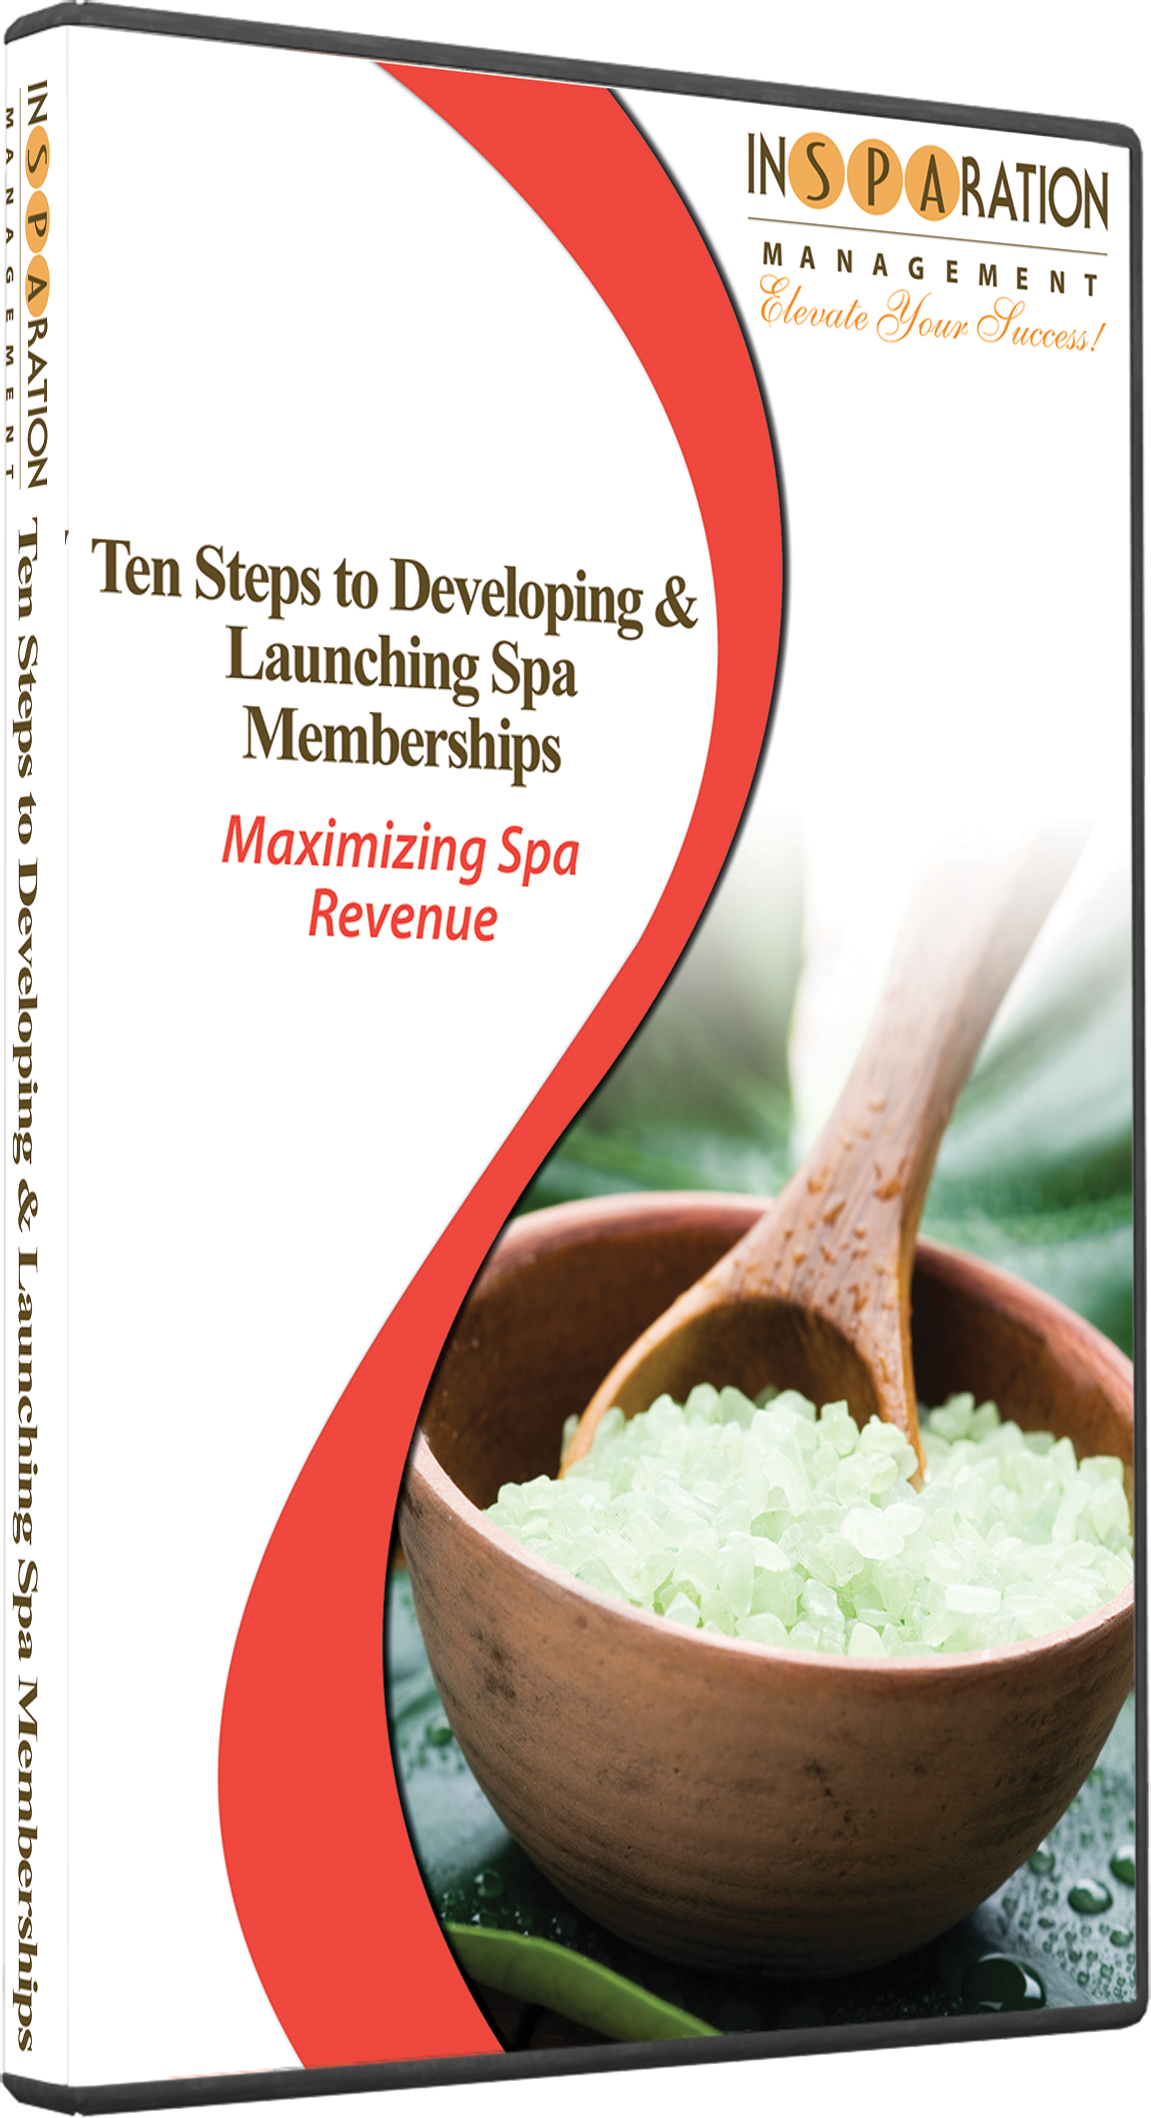 7 Steps To Assess Your Spa Or Medi Spa Business Insparation Management